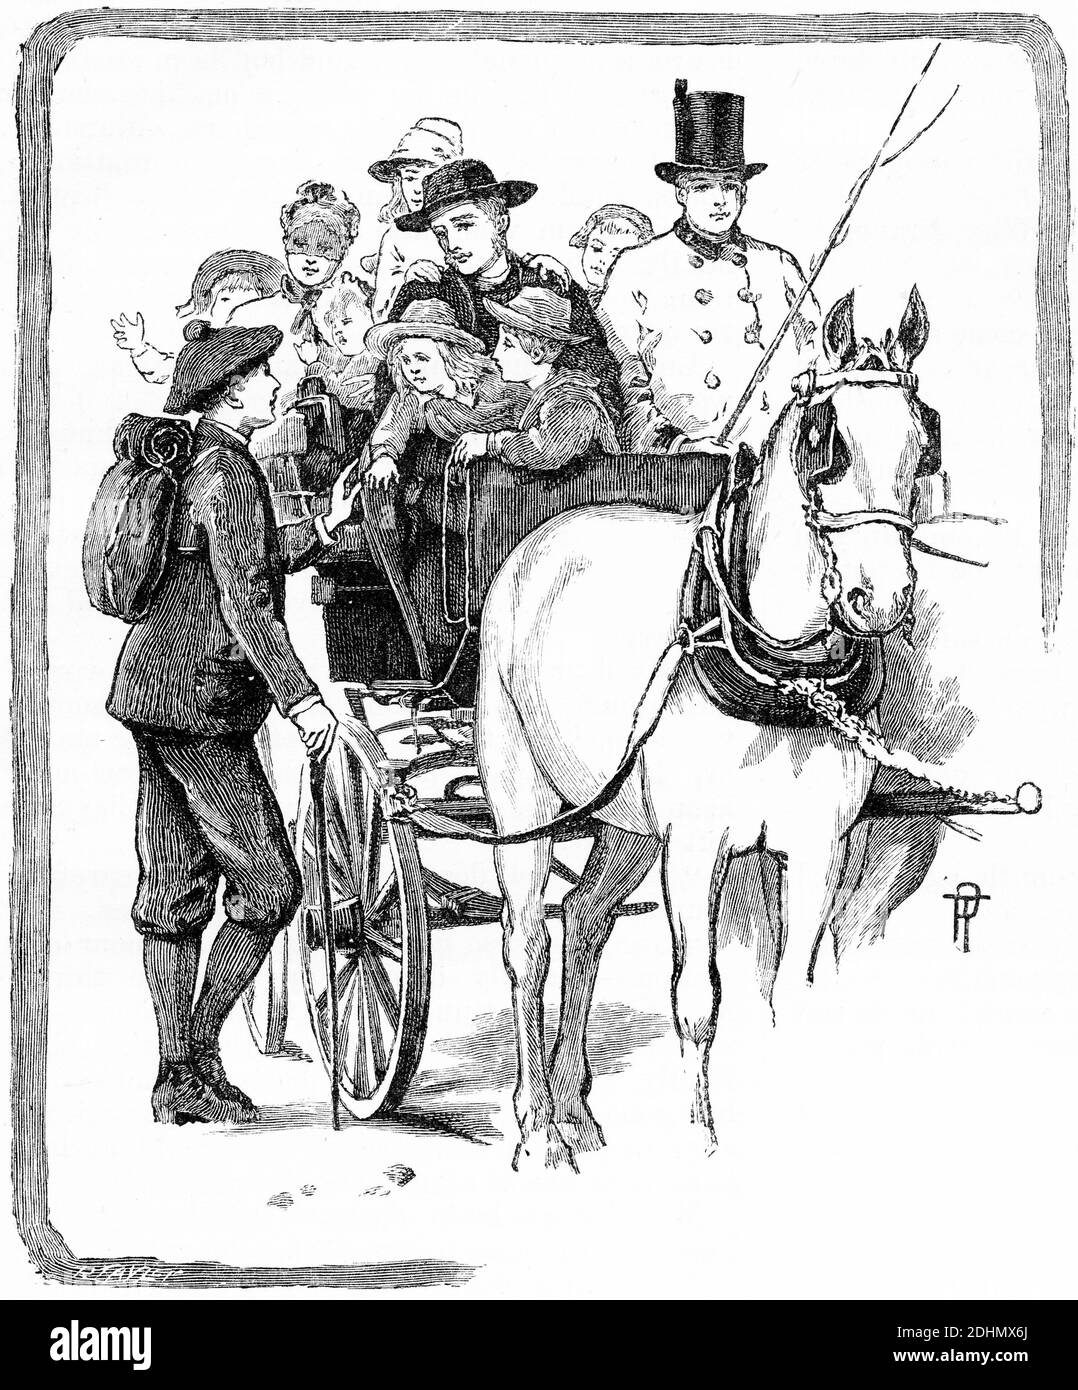 Engraving of a man speaking to a group of people on a horse-drawn buggy. Stock Photo